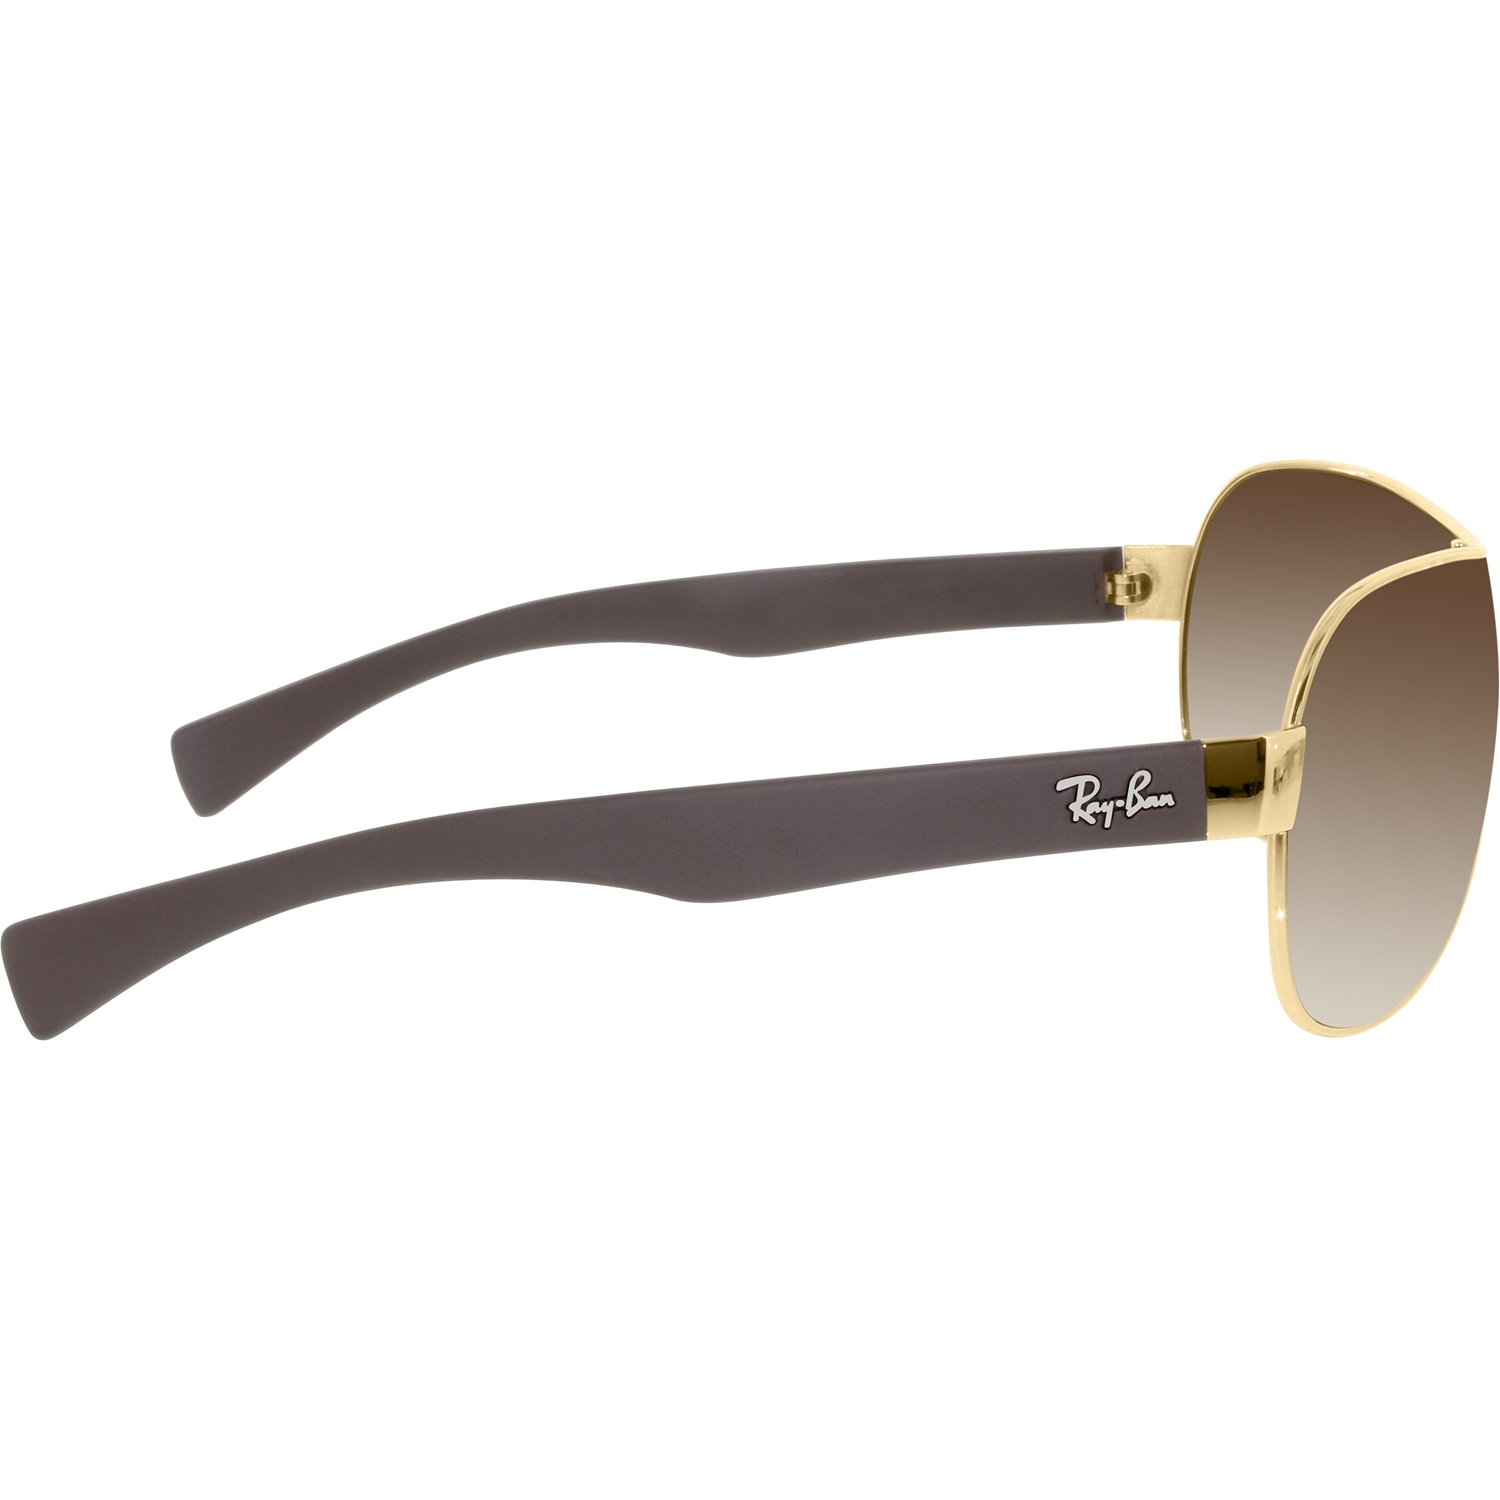 Ray-Ban Men's Gradient Highstreet RB3471-001/13-32 Gold Shield Sunglasses - image 2 of 3